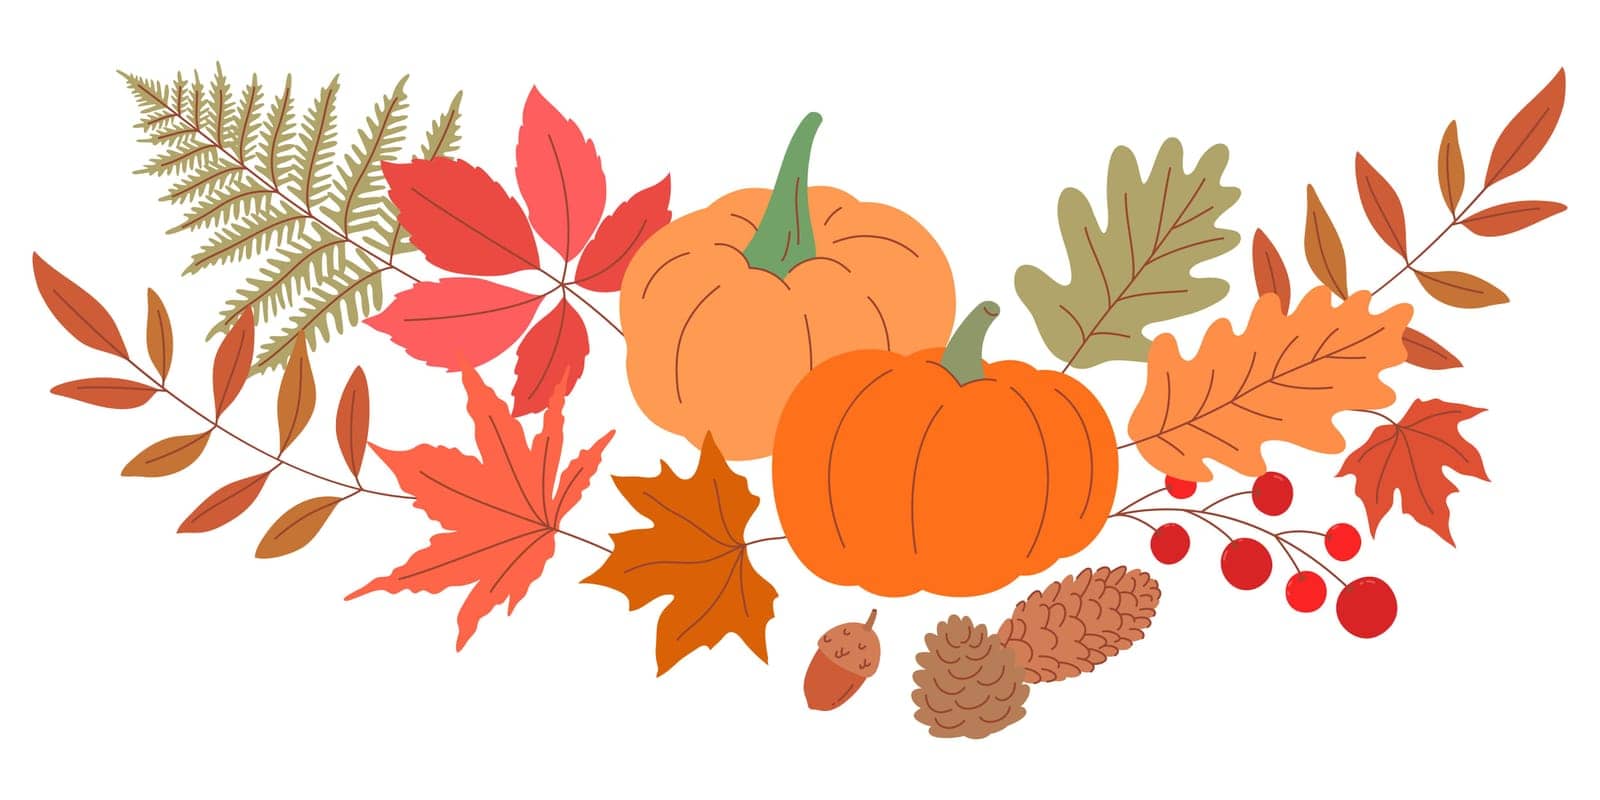 set of autumn seasonal elements decorated as pattern divider flat lined stylised vector illustration